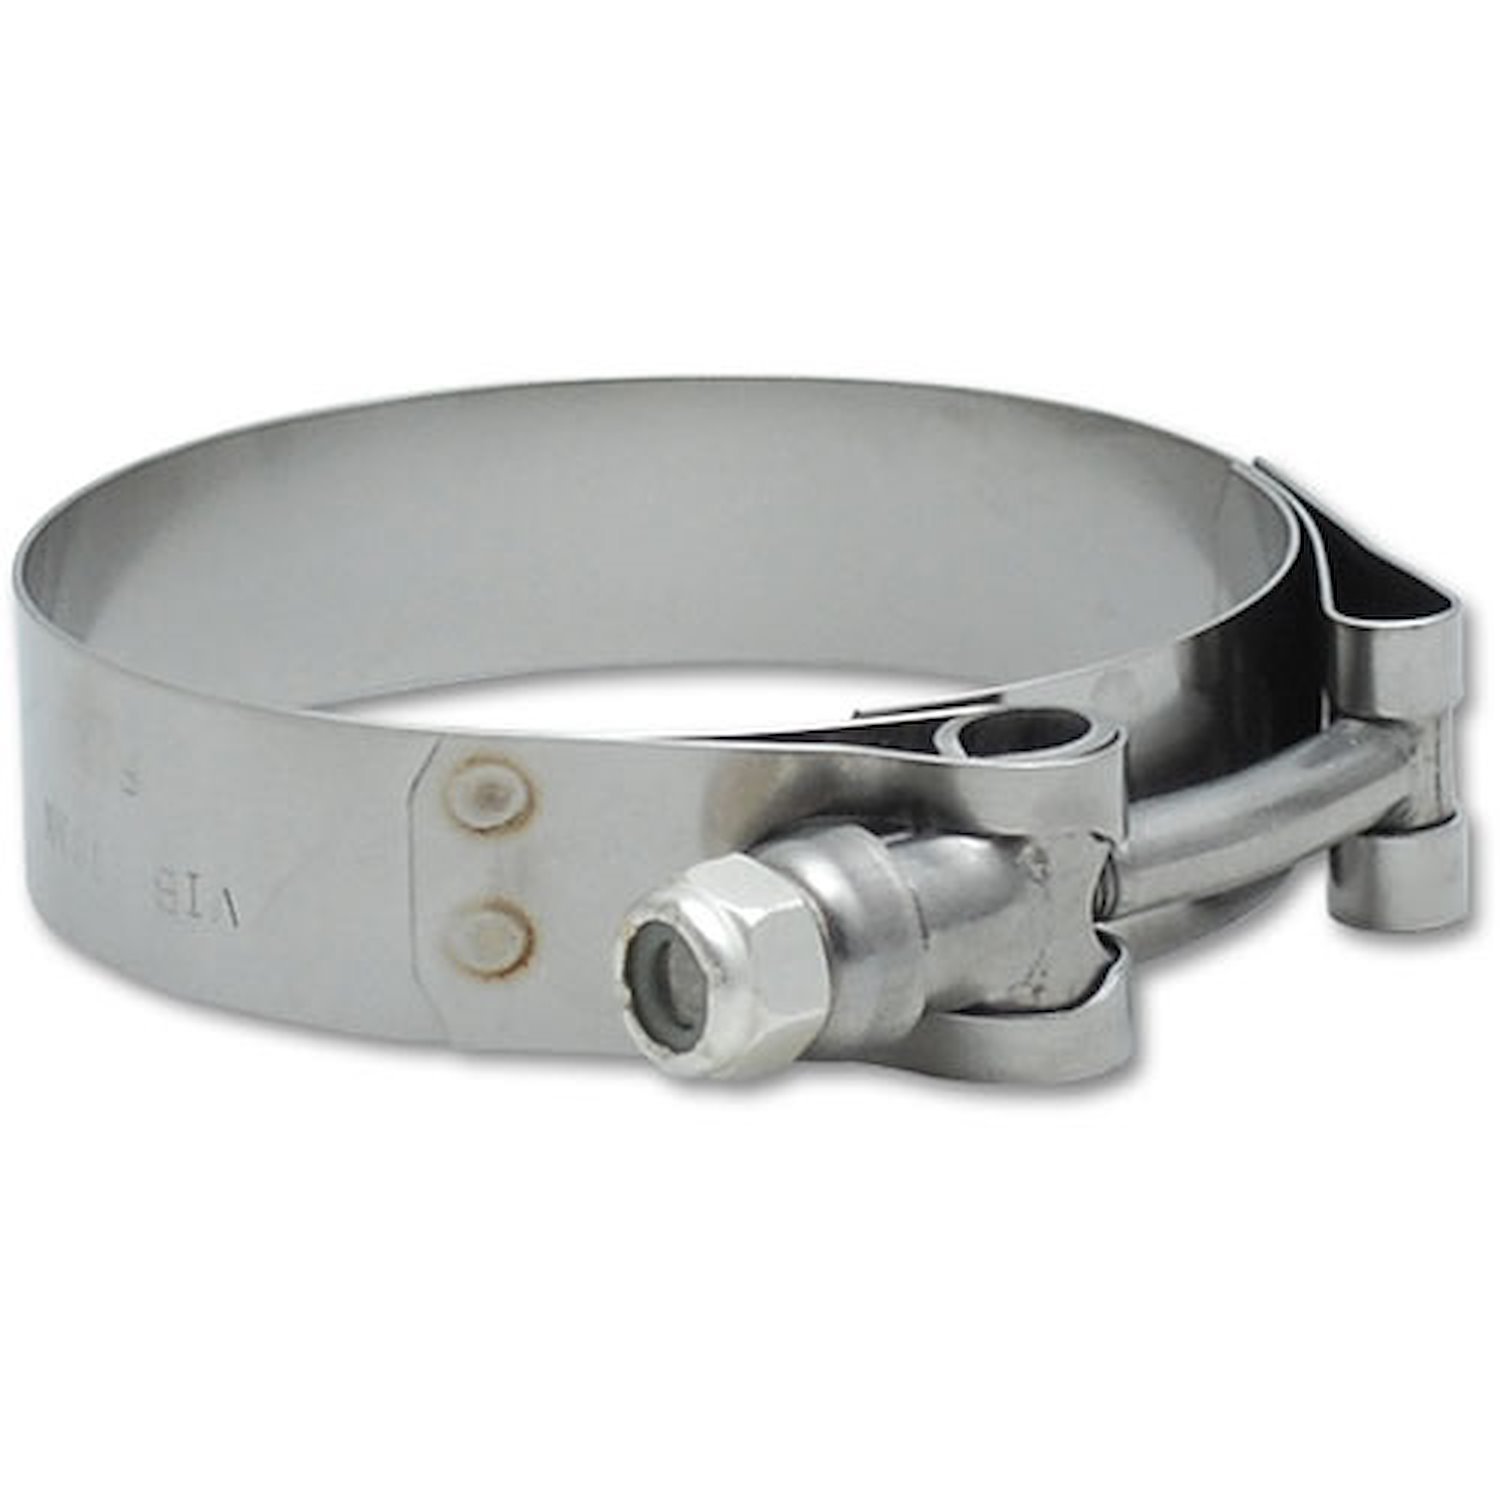 Stainless Steel T-Bolt Clamps Clamp Range 3.76" - 4.05"